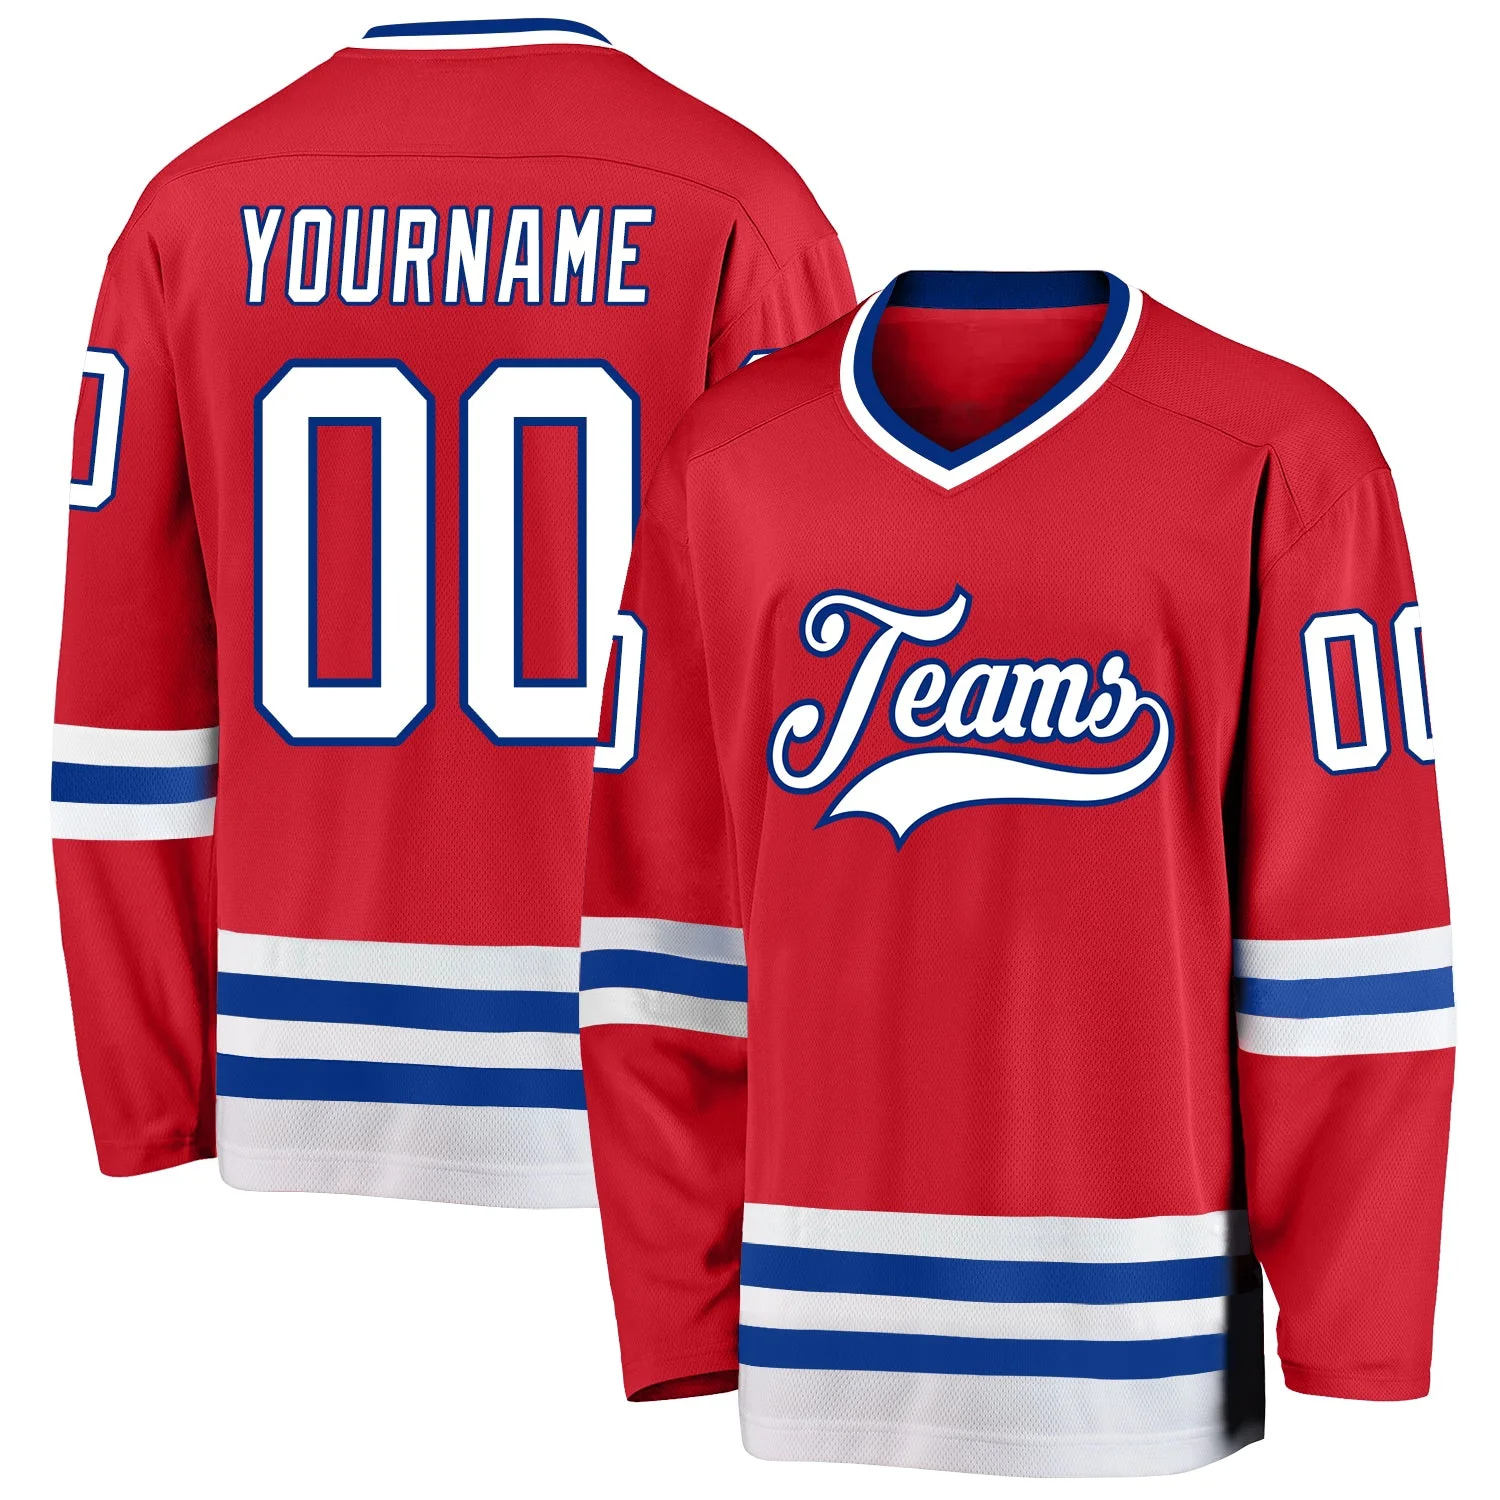 Stitched And Print Red White-Royal Hockey Jersey Custom